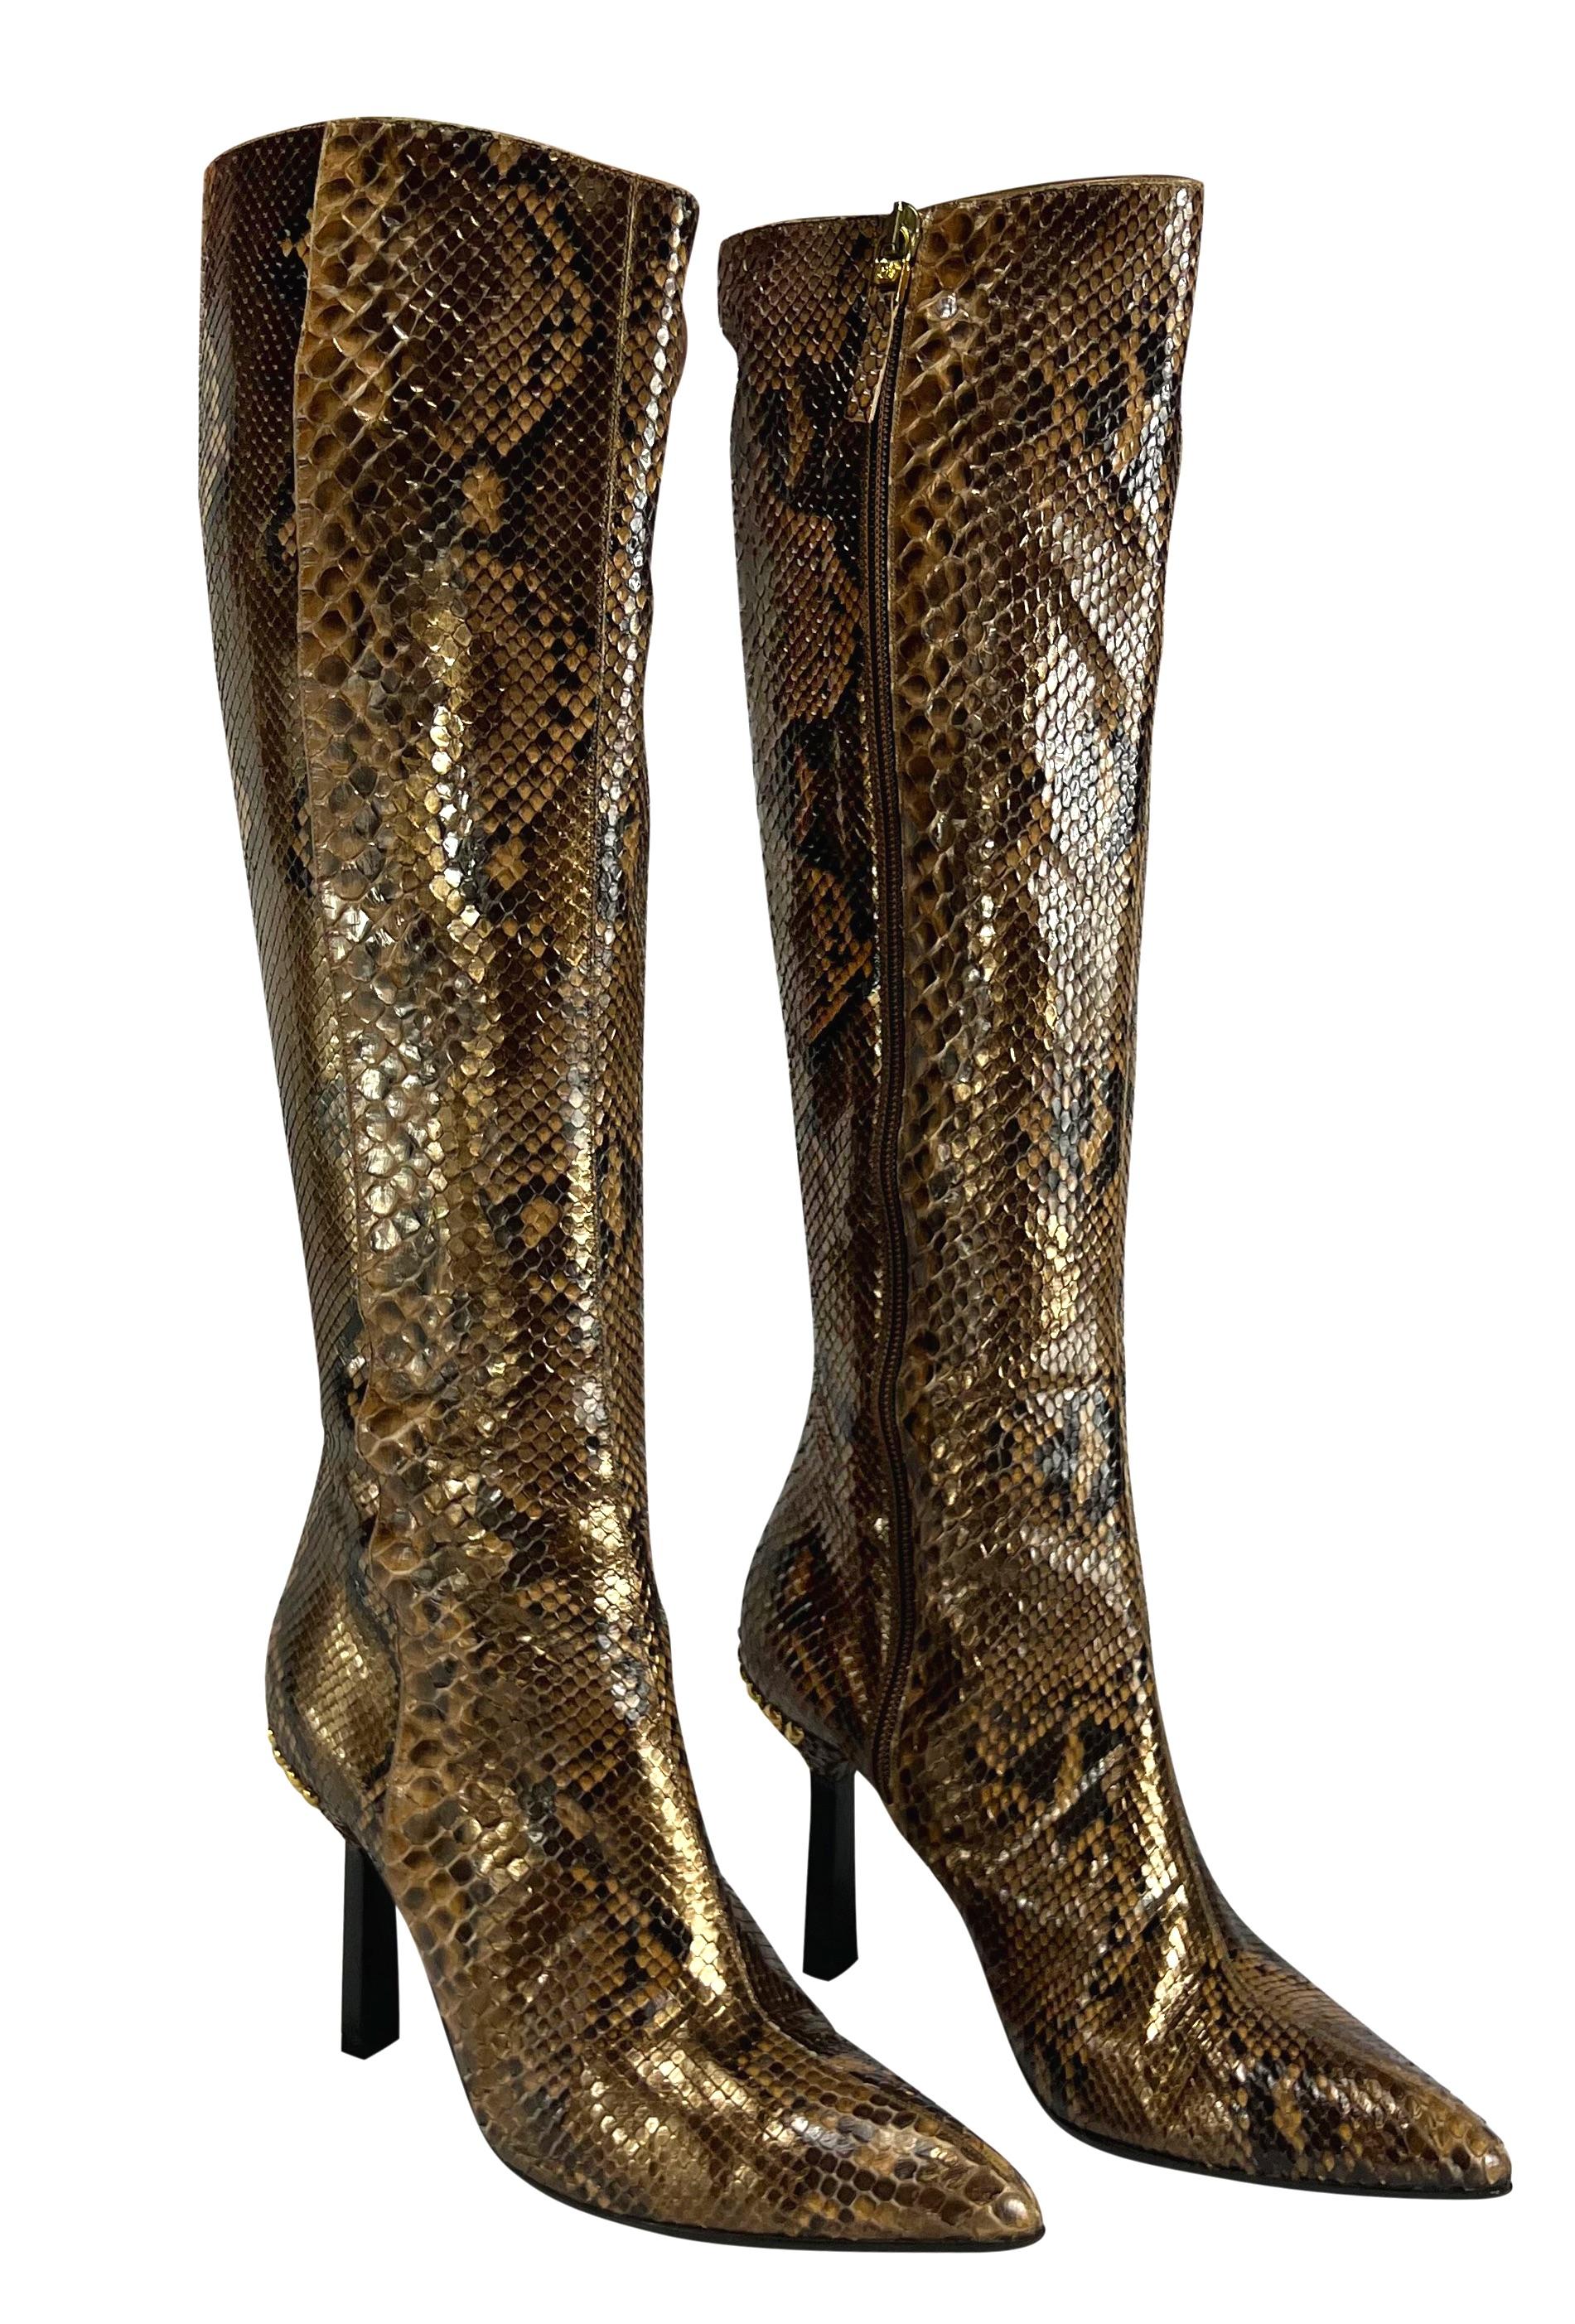 F/W 1999 Gianni Versace by Donatella Metallic Python Heel Boots Size 37 For Sale 3